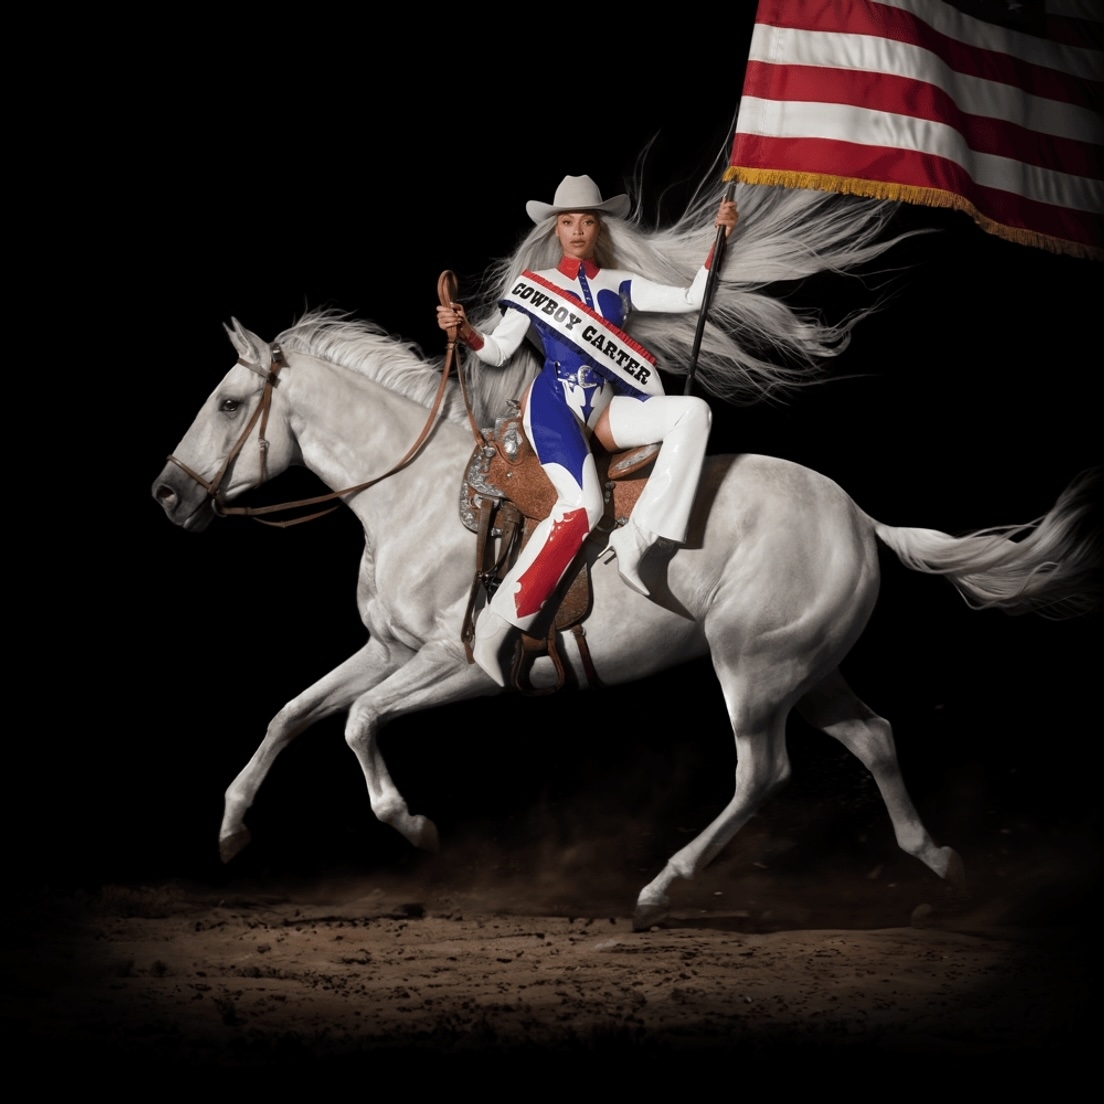 Lady Gaga riding a white horse, dressed in a red, white, and blue outfit with &quot;Porter on Cartier&quot; adorned across the chest, holding an American flag